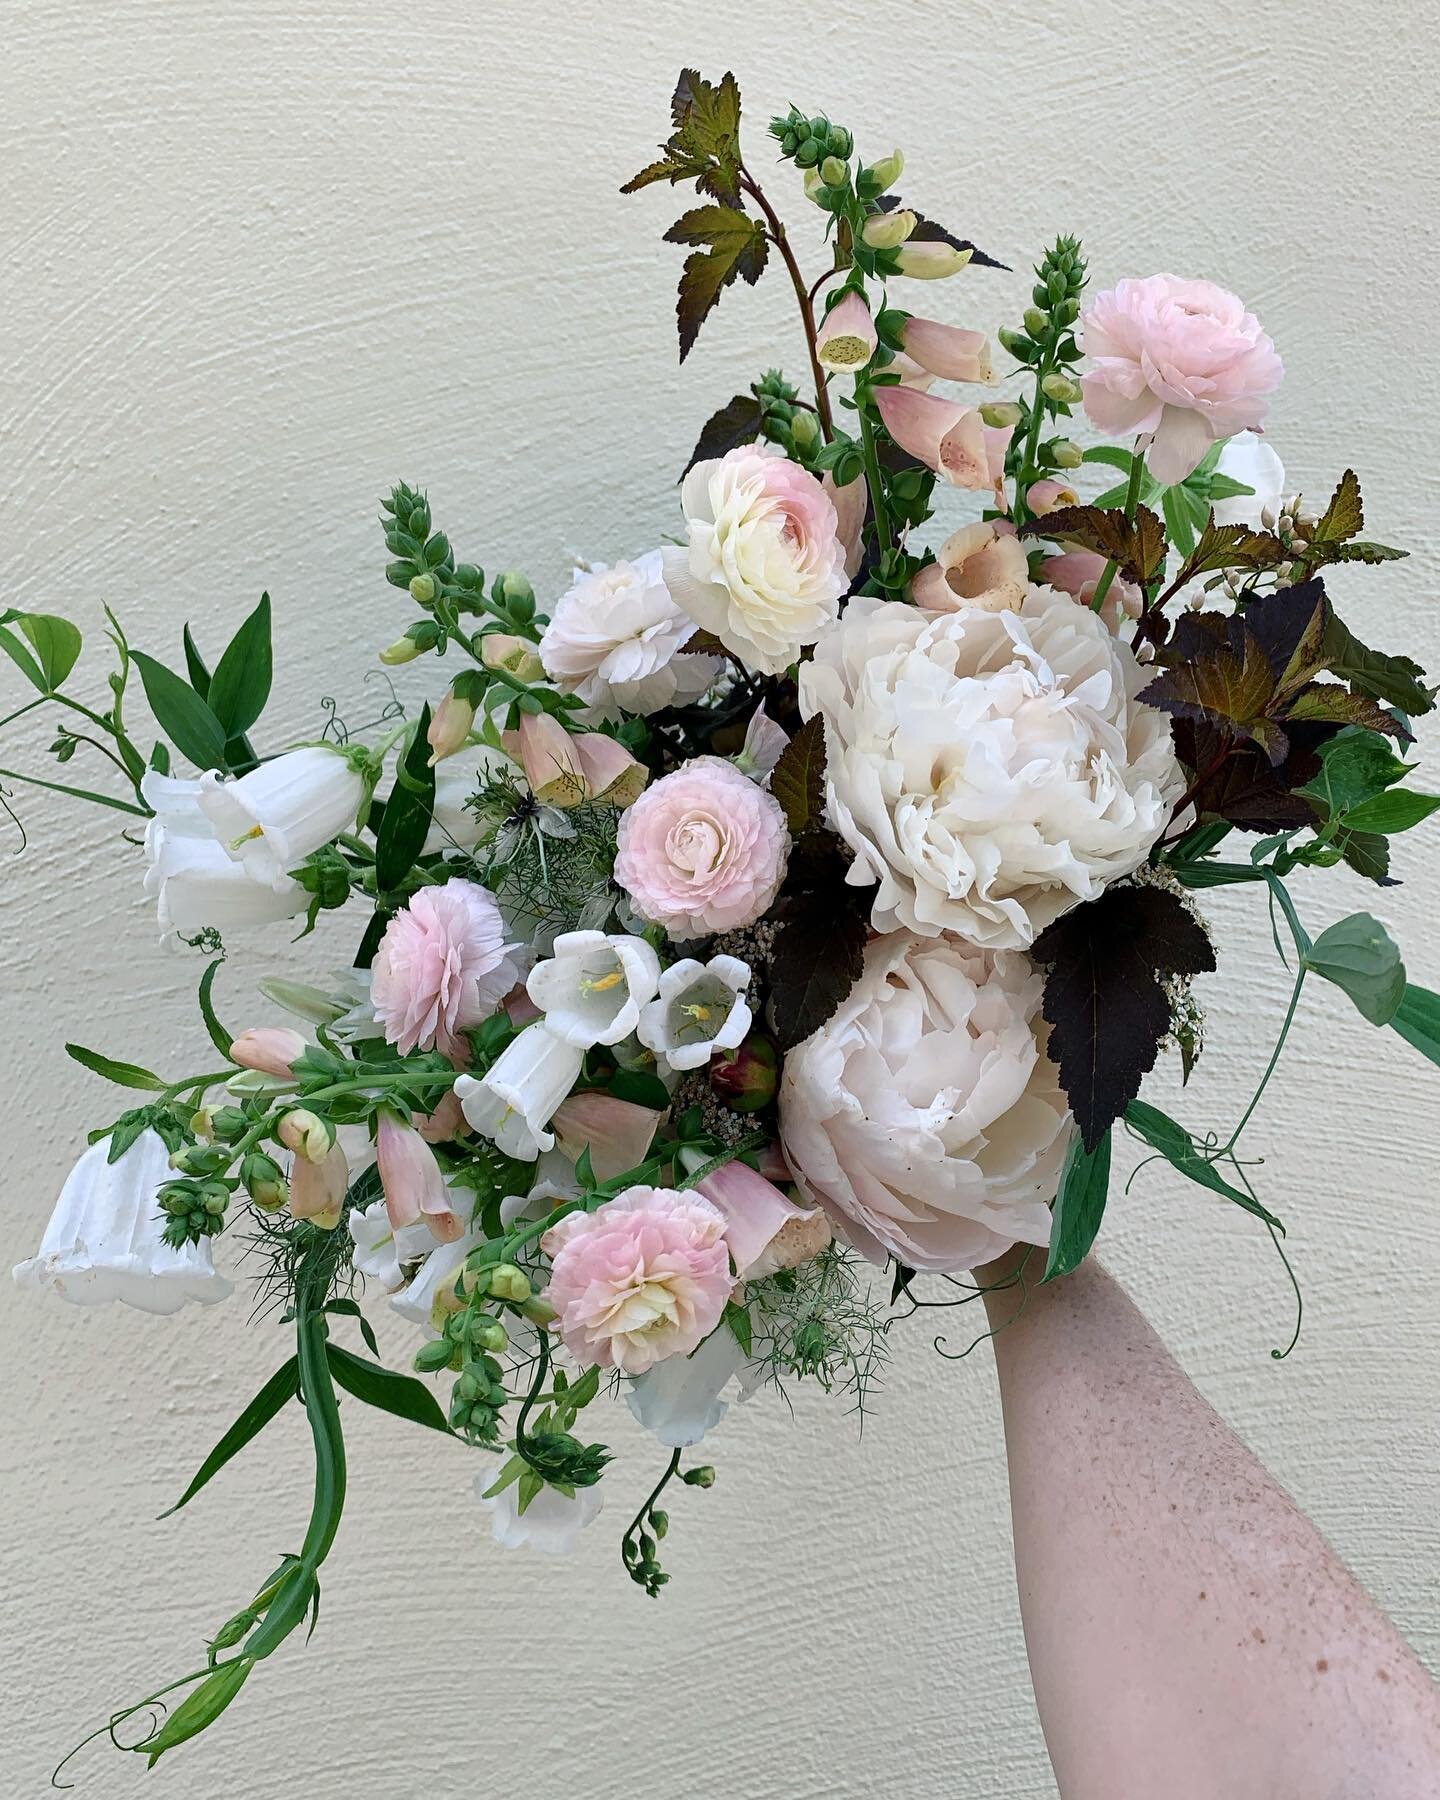 This bridal babe got the royal treatment with every bit of it&rsquo;s ingredients coming from @terraflowerfarm 🥳 peonies, campanula, nigella, ranunculus, ninebark, foxglove, sweet pea- all gorgeous and quality varieties!